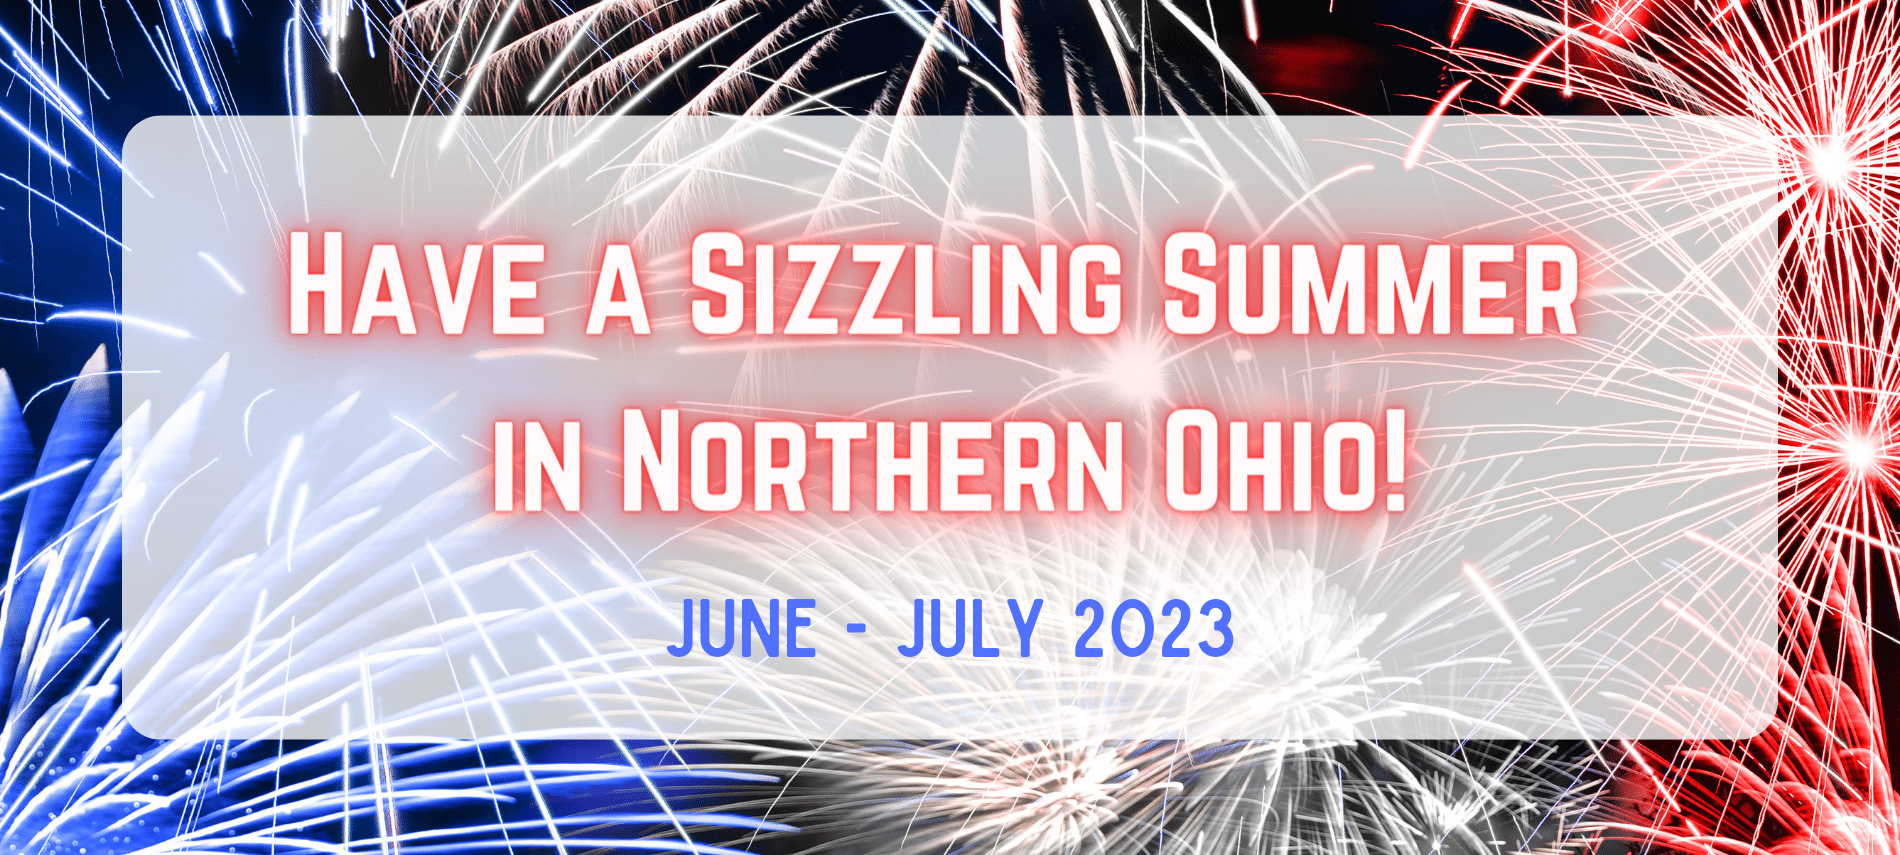 Have a Sizzling Summer in Northern Ohio - june-July 2023 on a background of red, white and blue fireworks